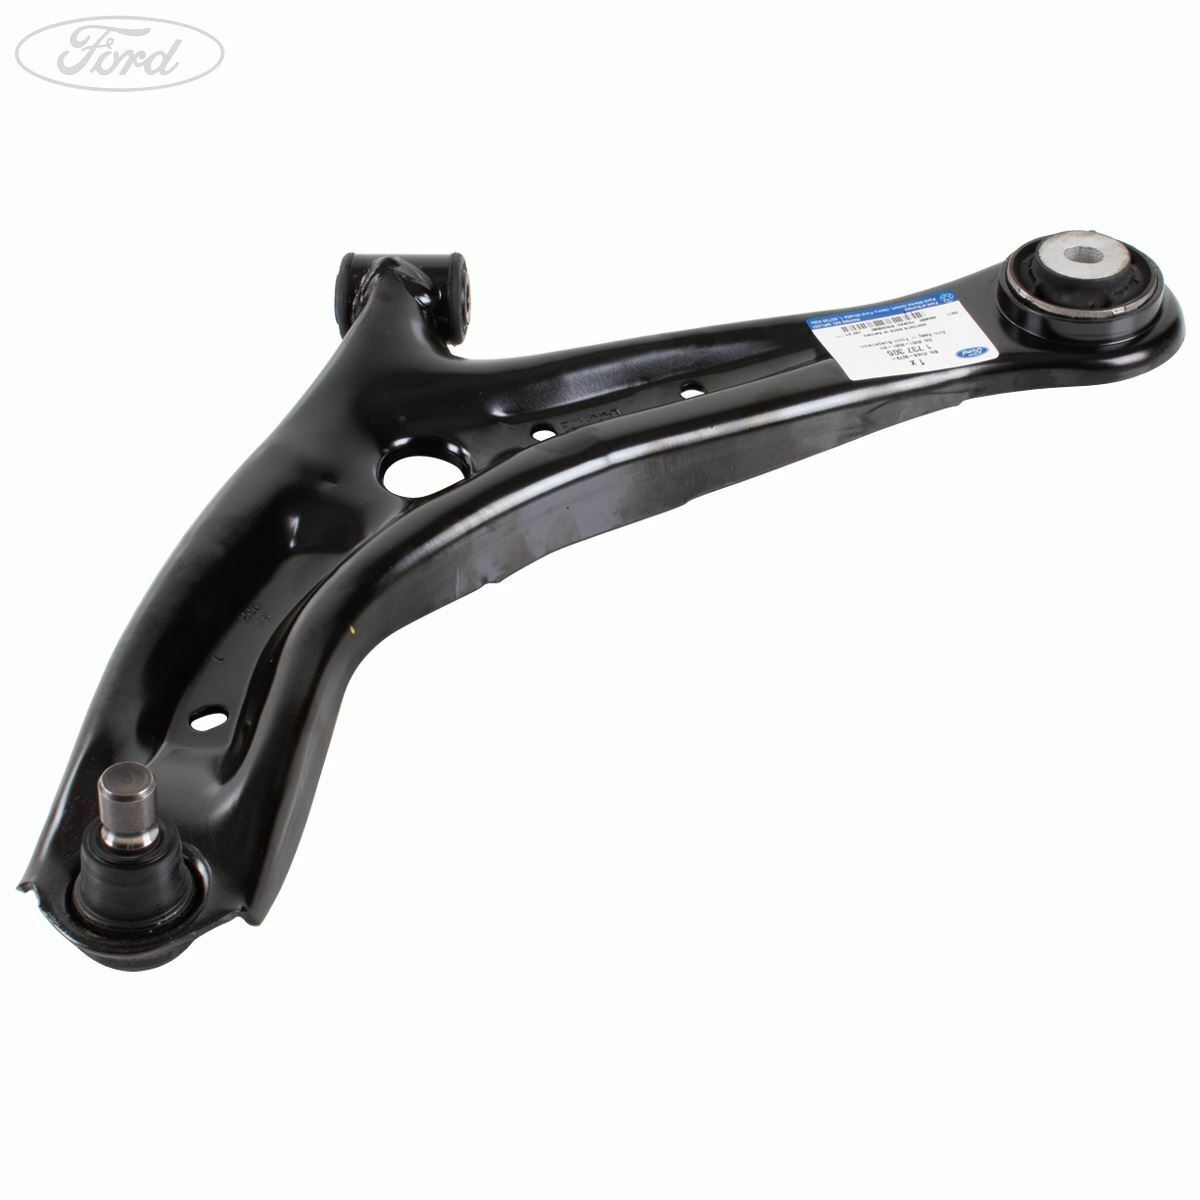 Genuine Ford Fiesta MK7 Front Lower Control Arm - Ecoboost, TDCI